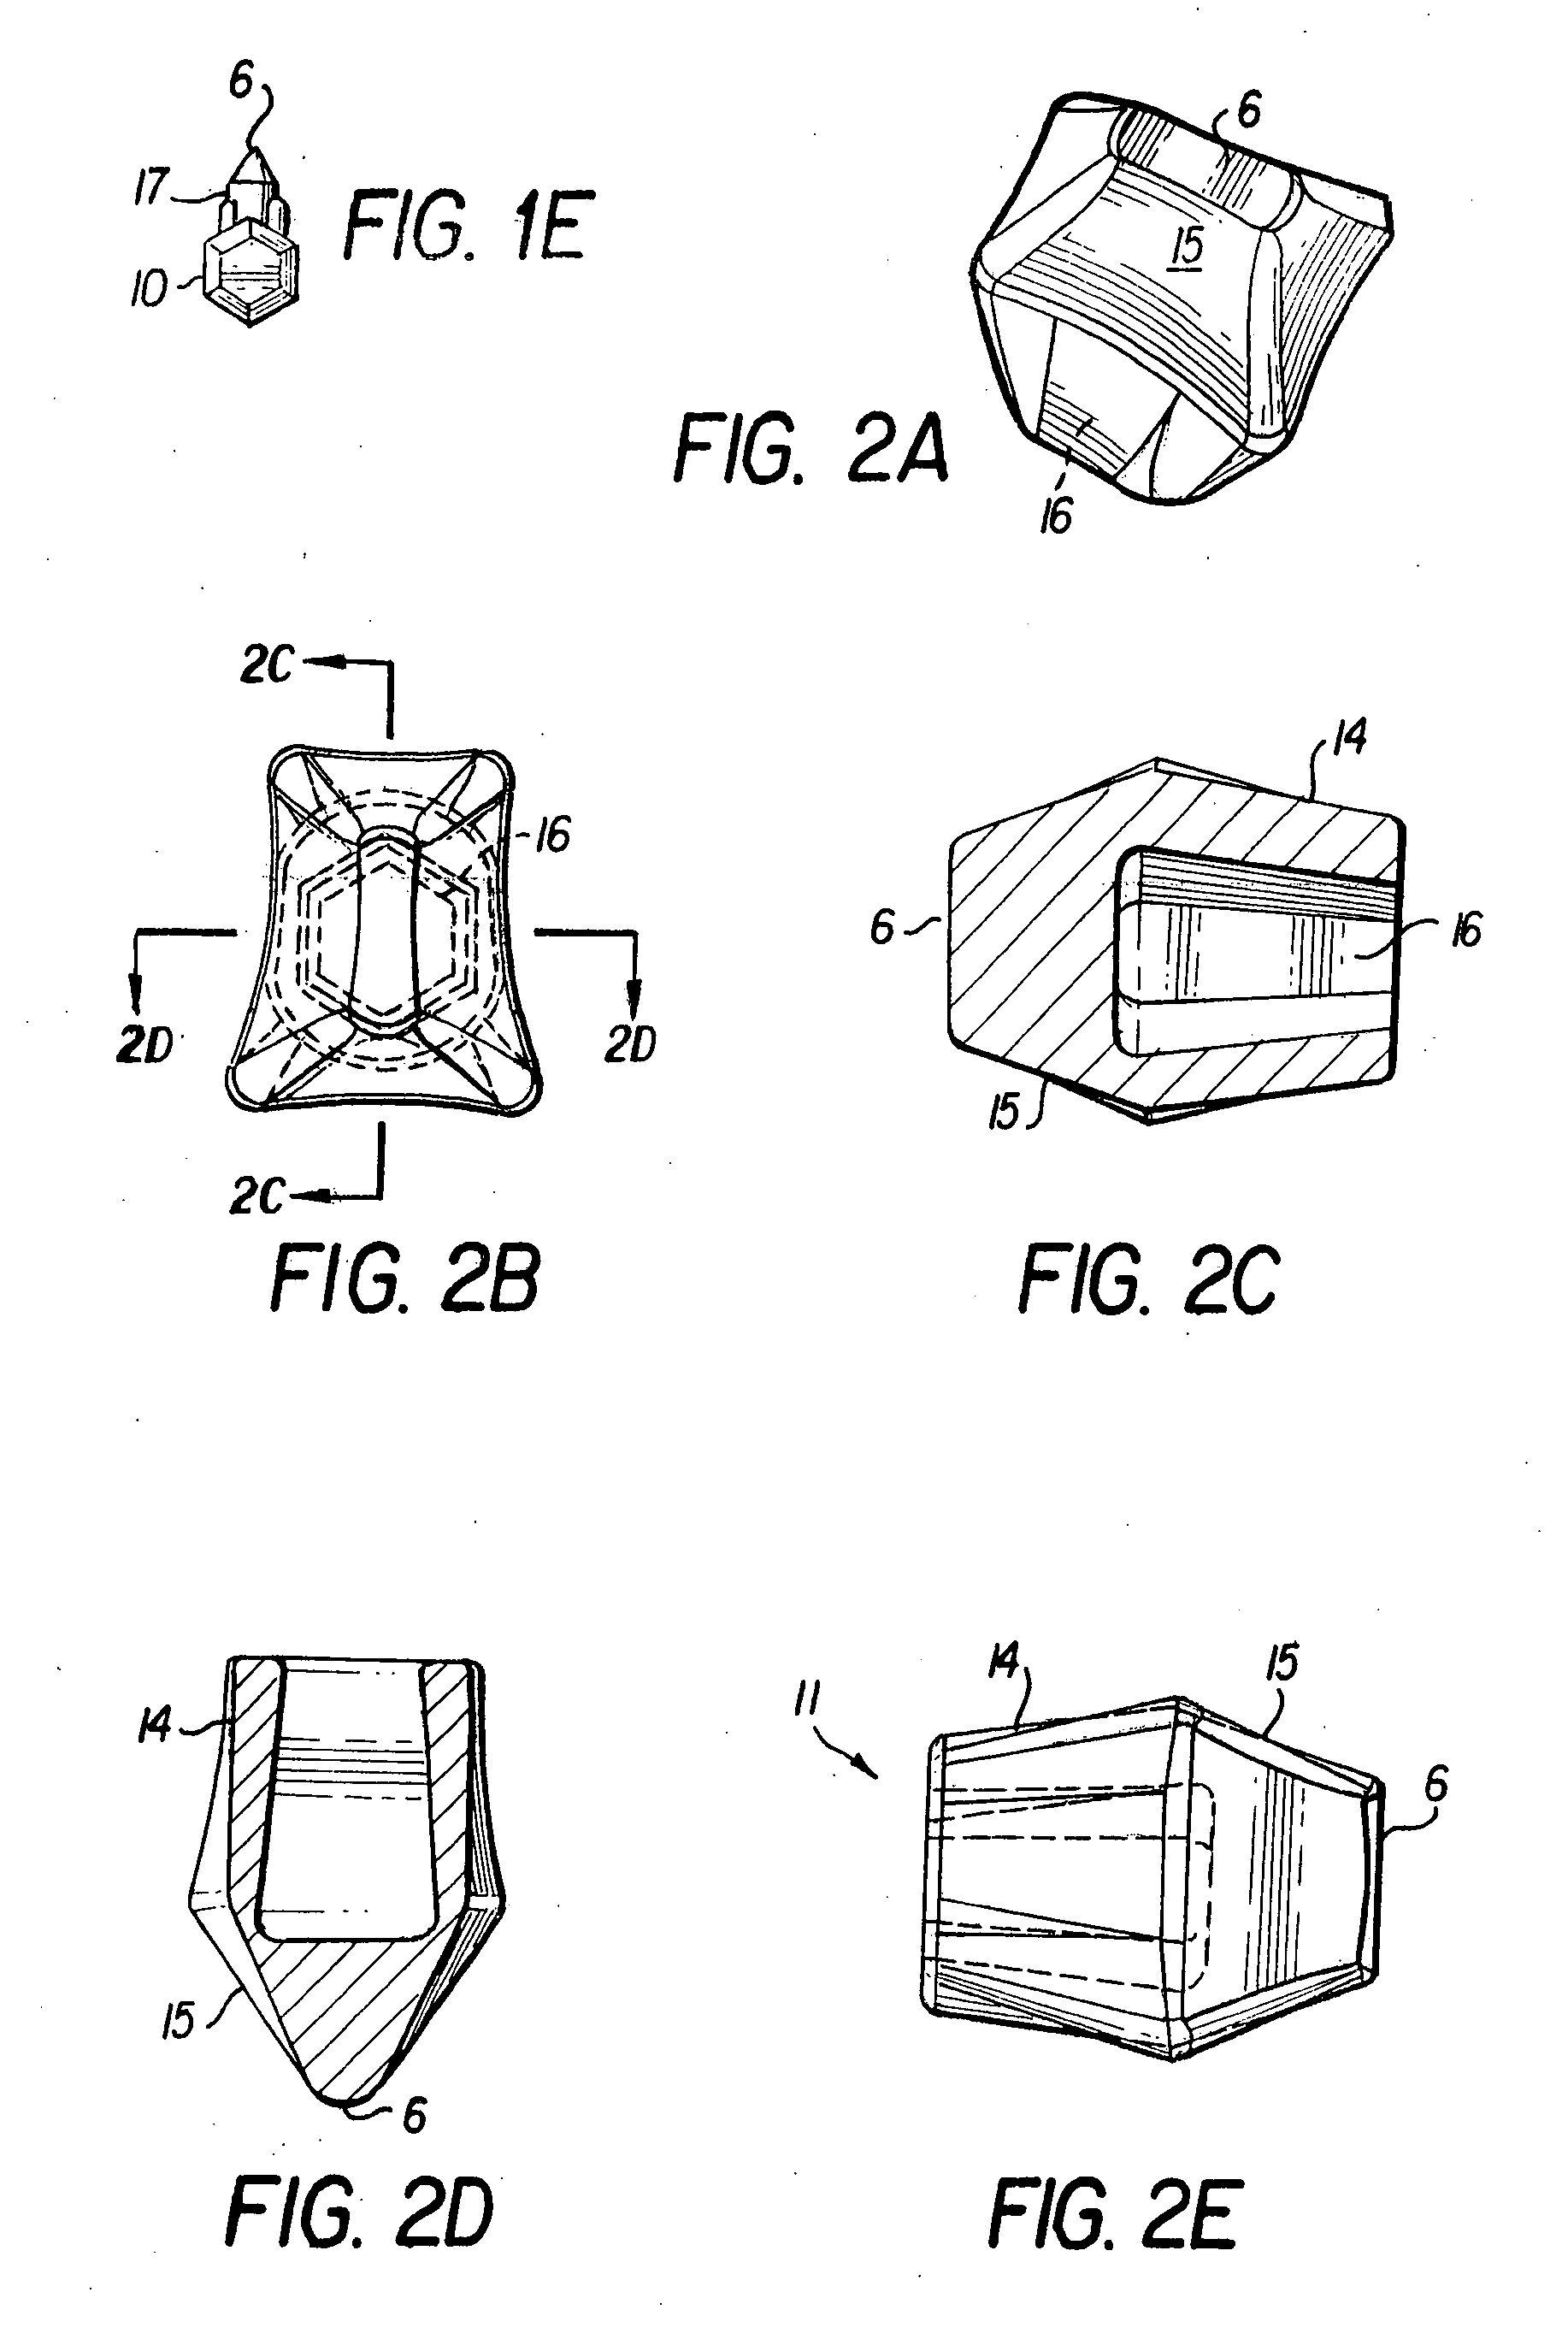 Dental appliance and method for positioning and holding inlays and onlays during bonding and cementation process